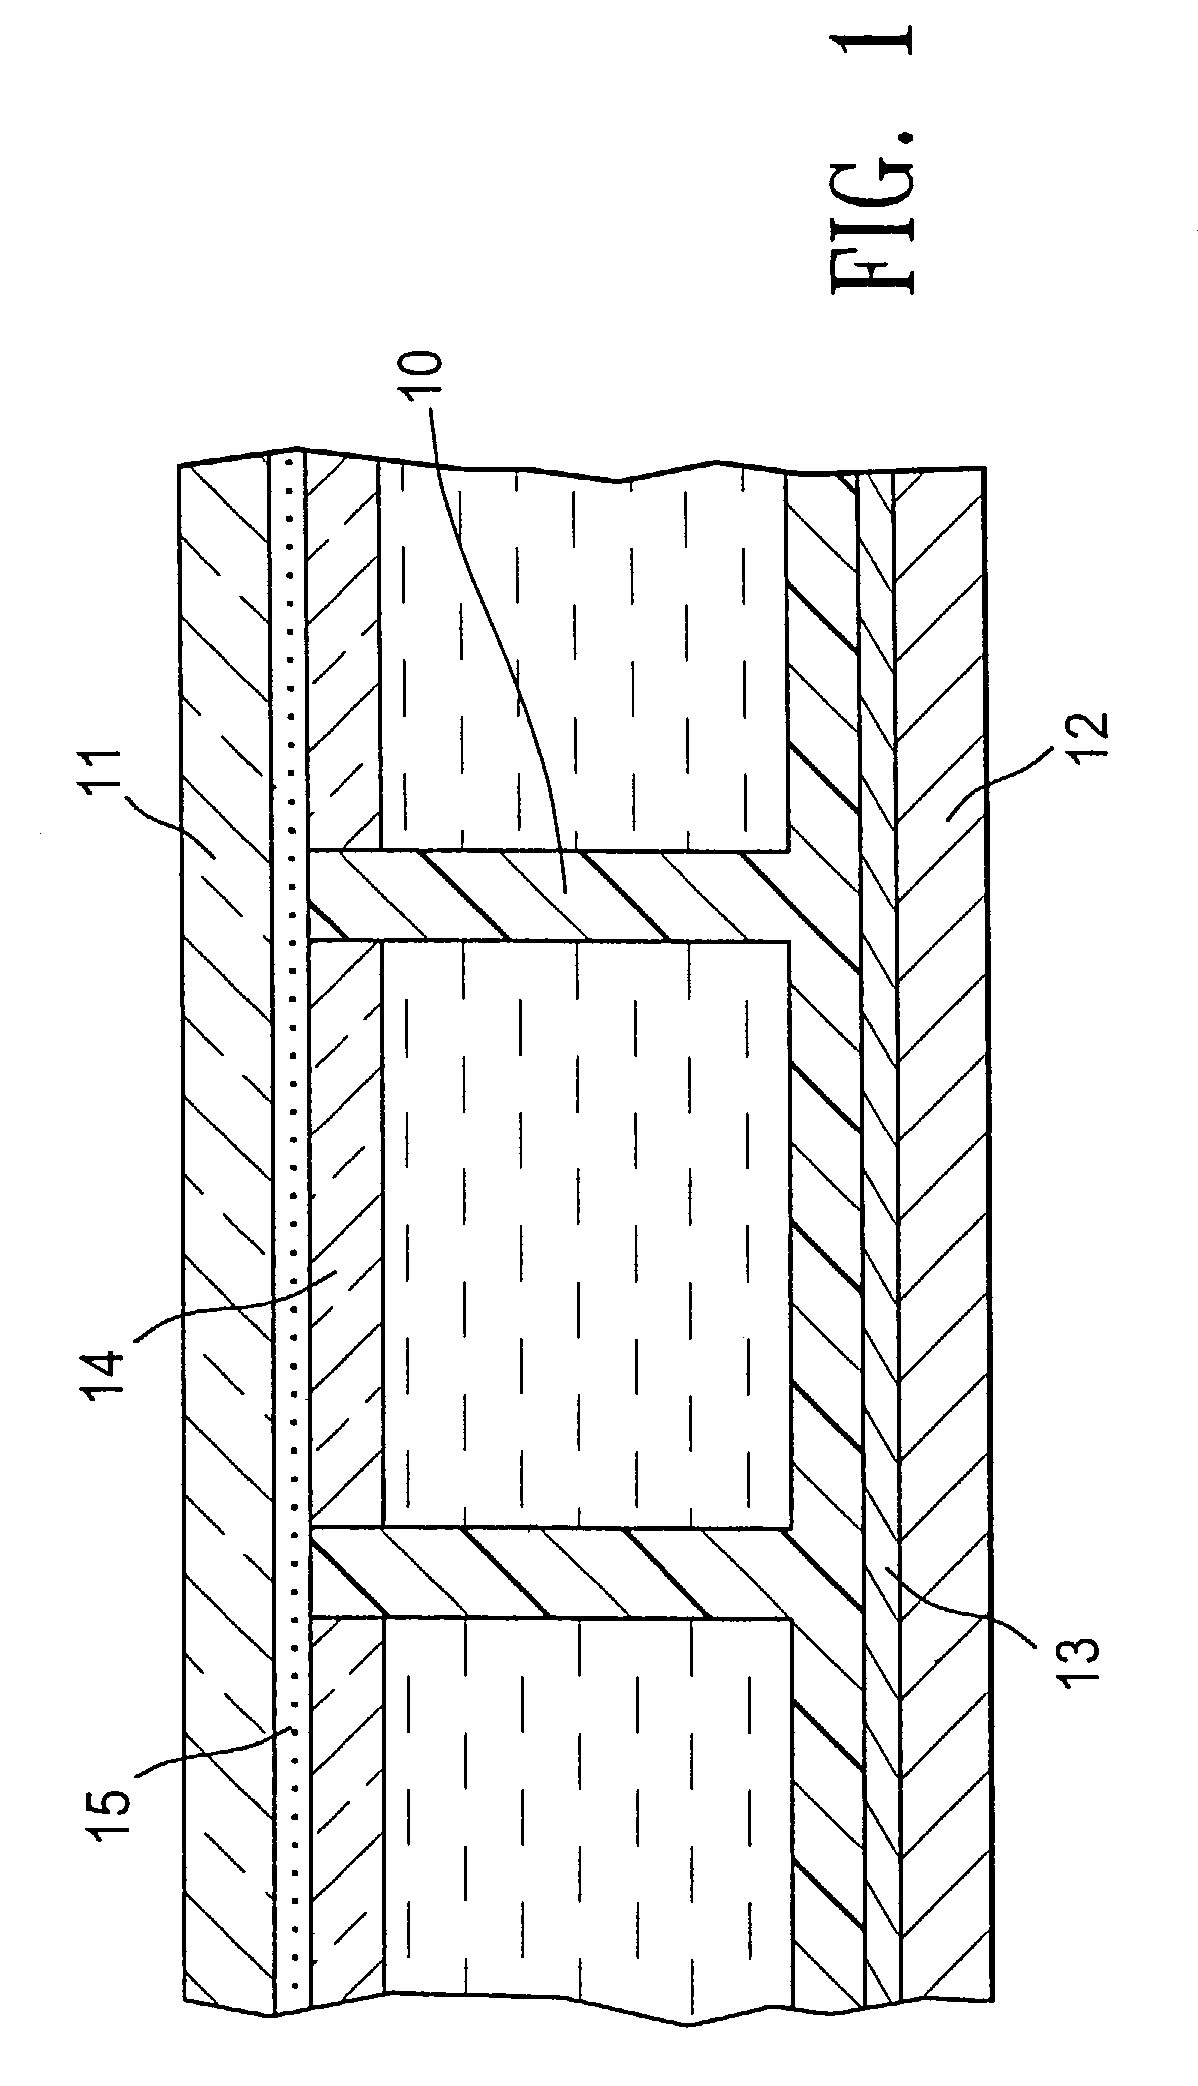 Electrode and connecting designs for roll-to-roll format flexible display manufacturing